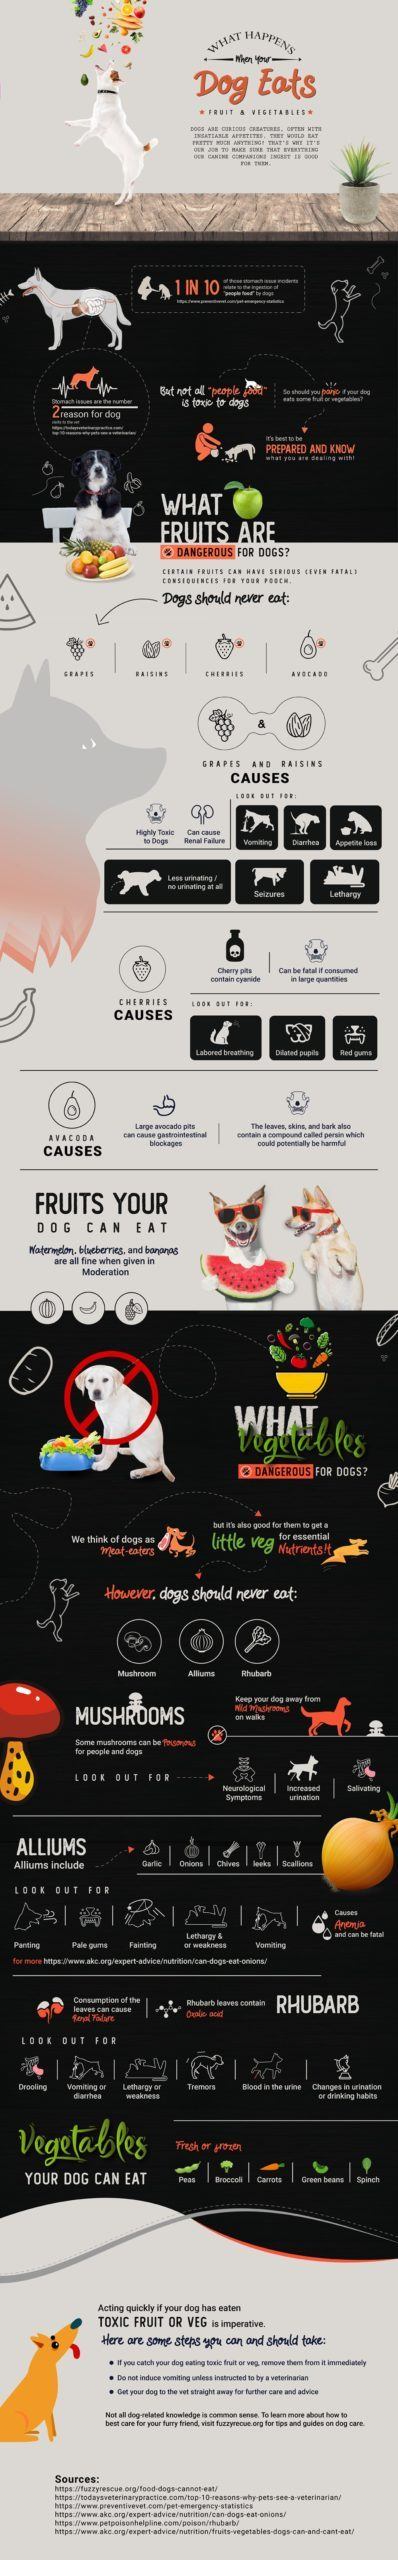 Has Your Dog Eaten Something Toxic? Here Are The Signs